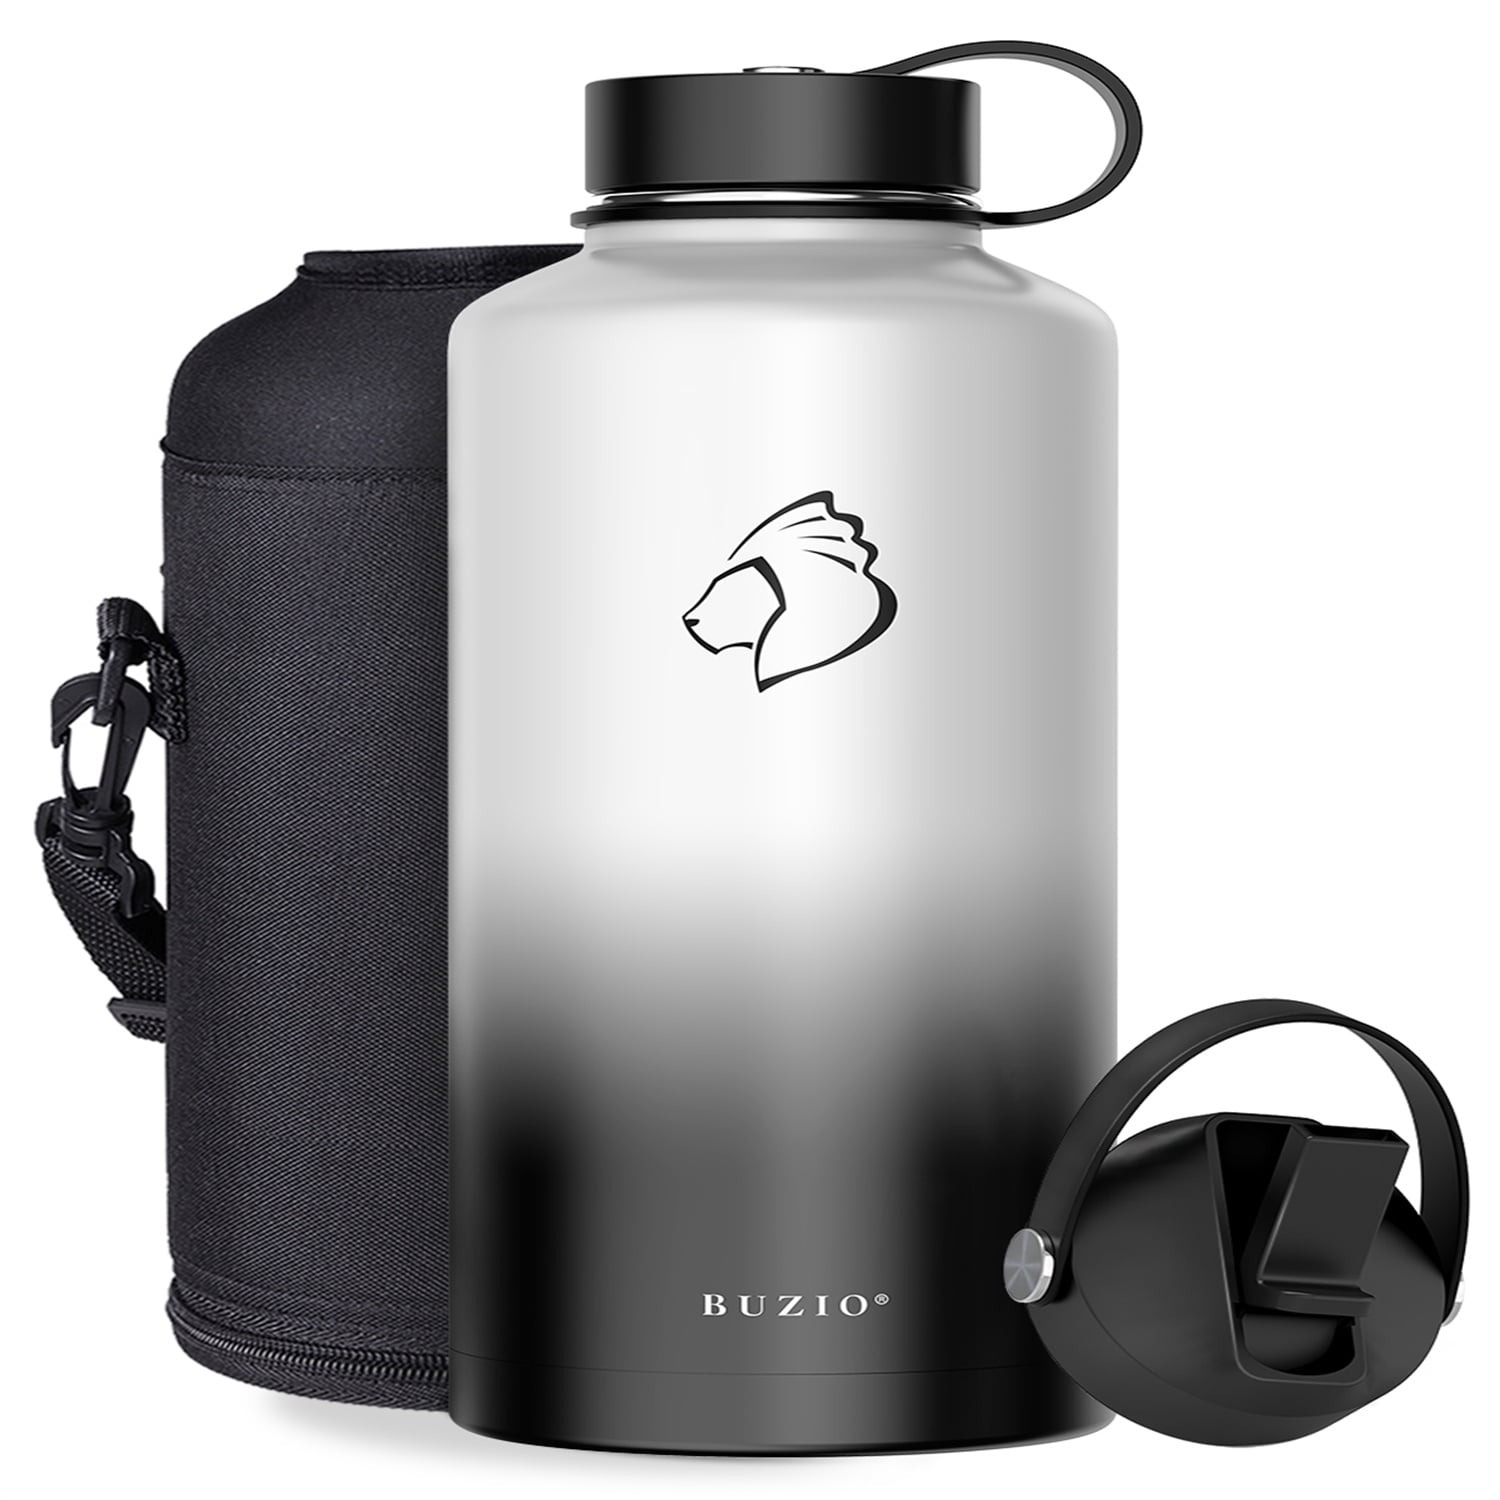 Aqwzh 20 oz Black Vacuum Insulated Stainless Steel Water Bottle with Wide Mouth and Straw Lid, Size: 3.9 inch x 3.9 inch x 11 inch